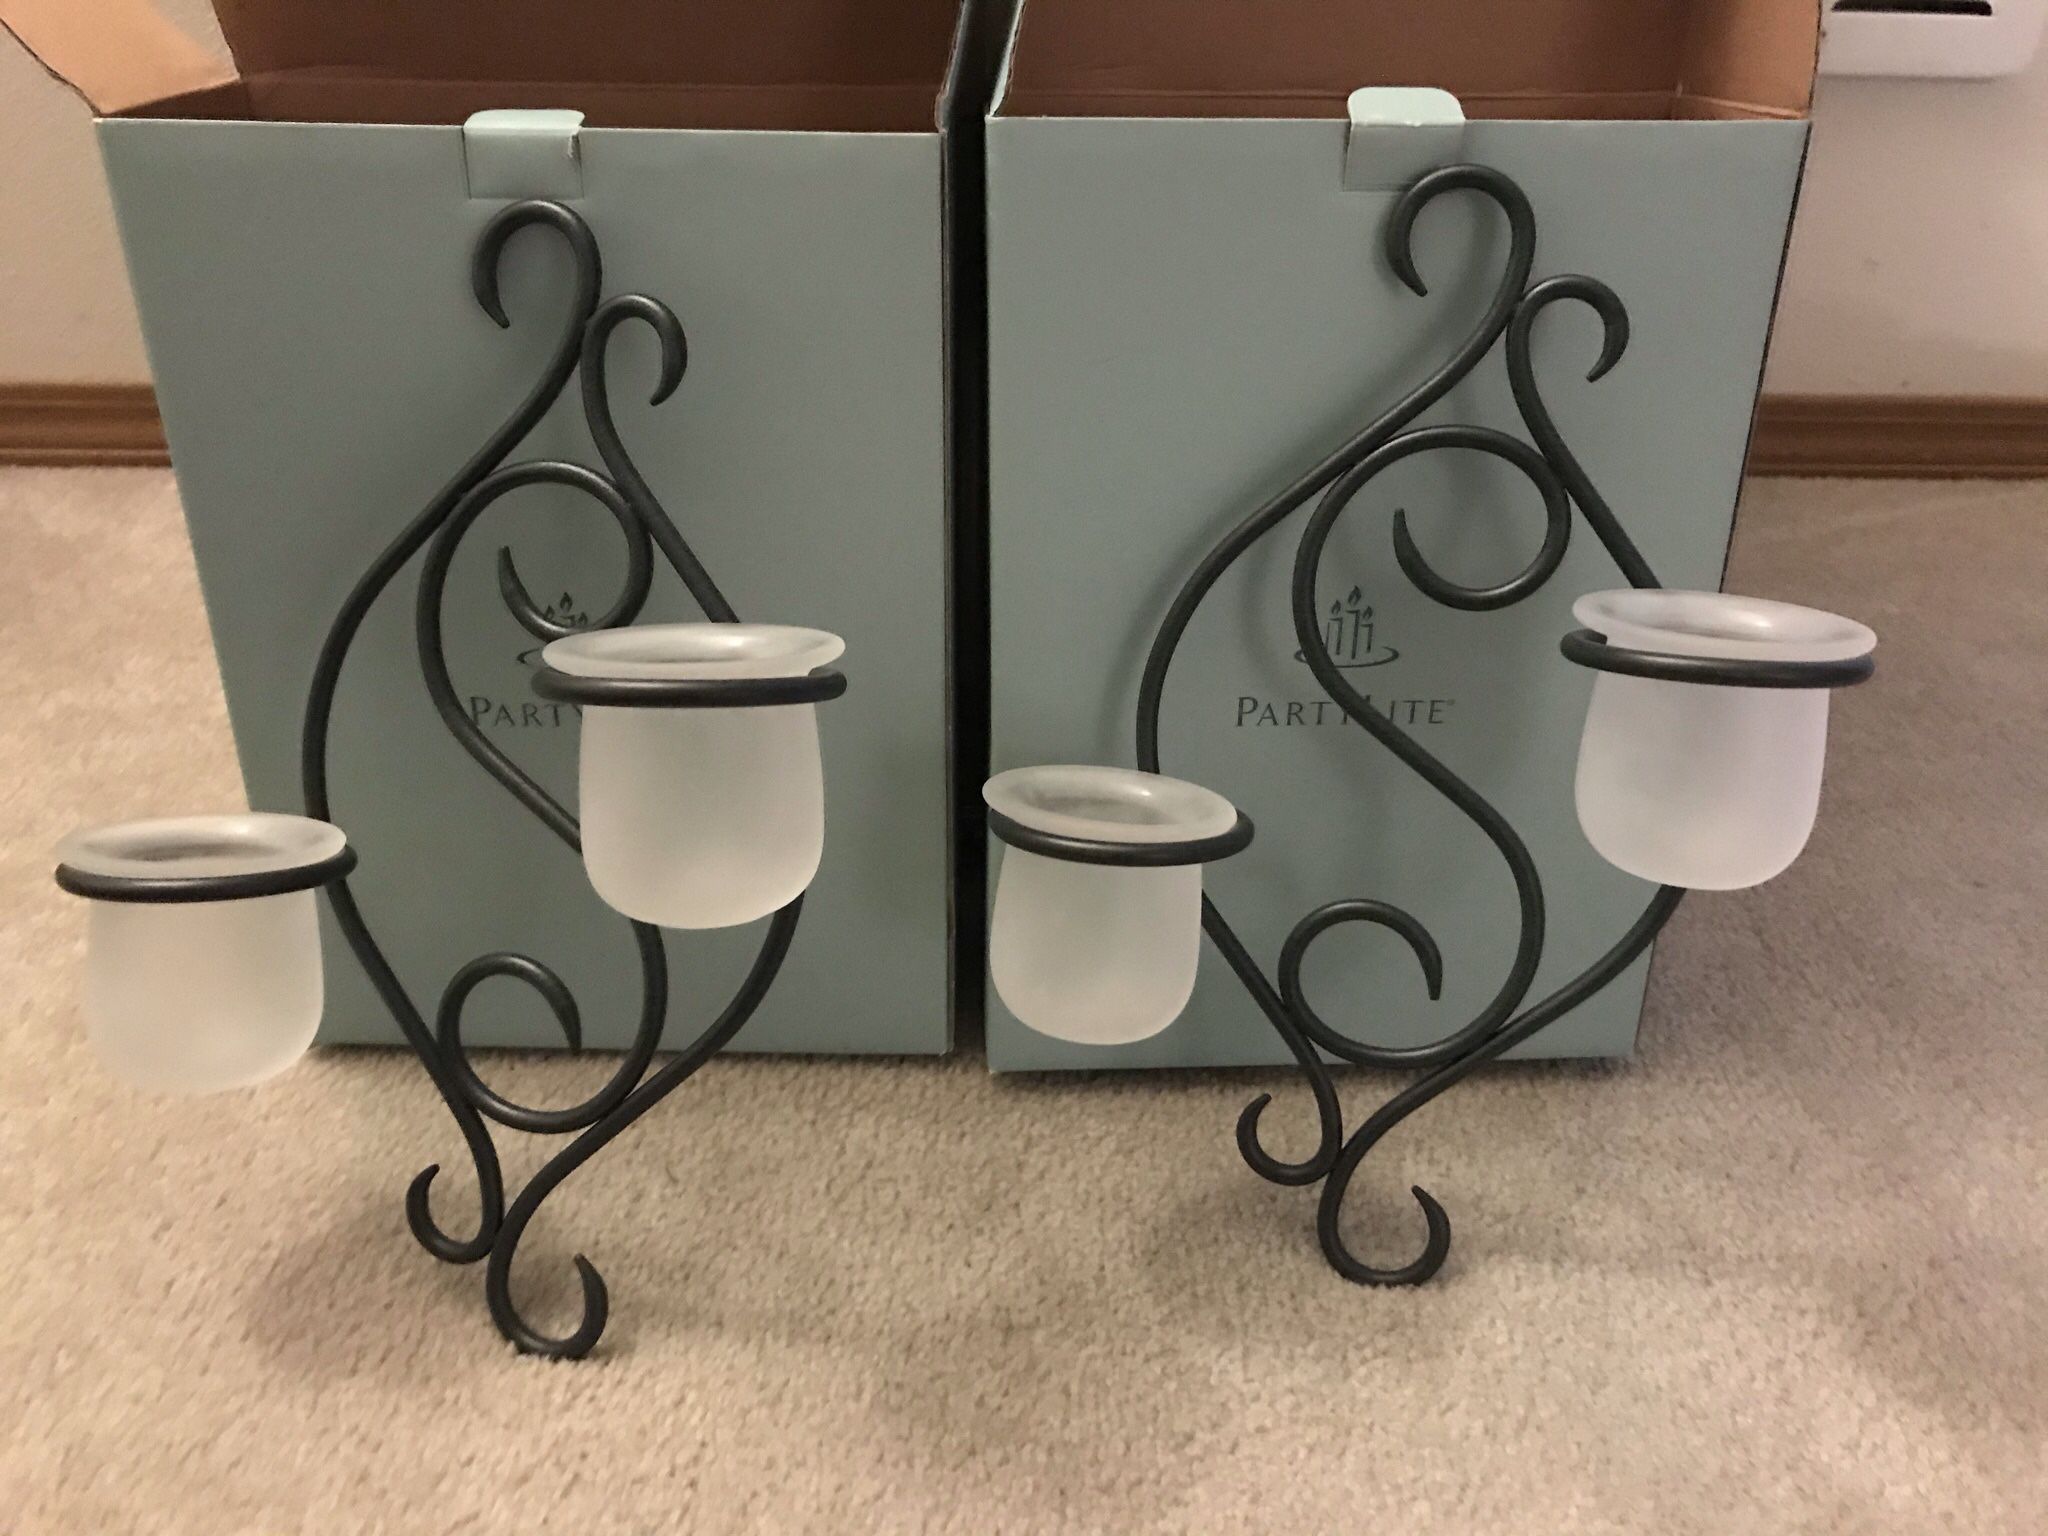 PartyLite Candle Wall Sconces